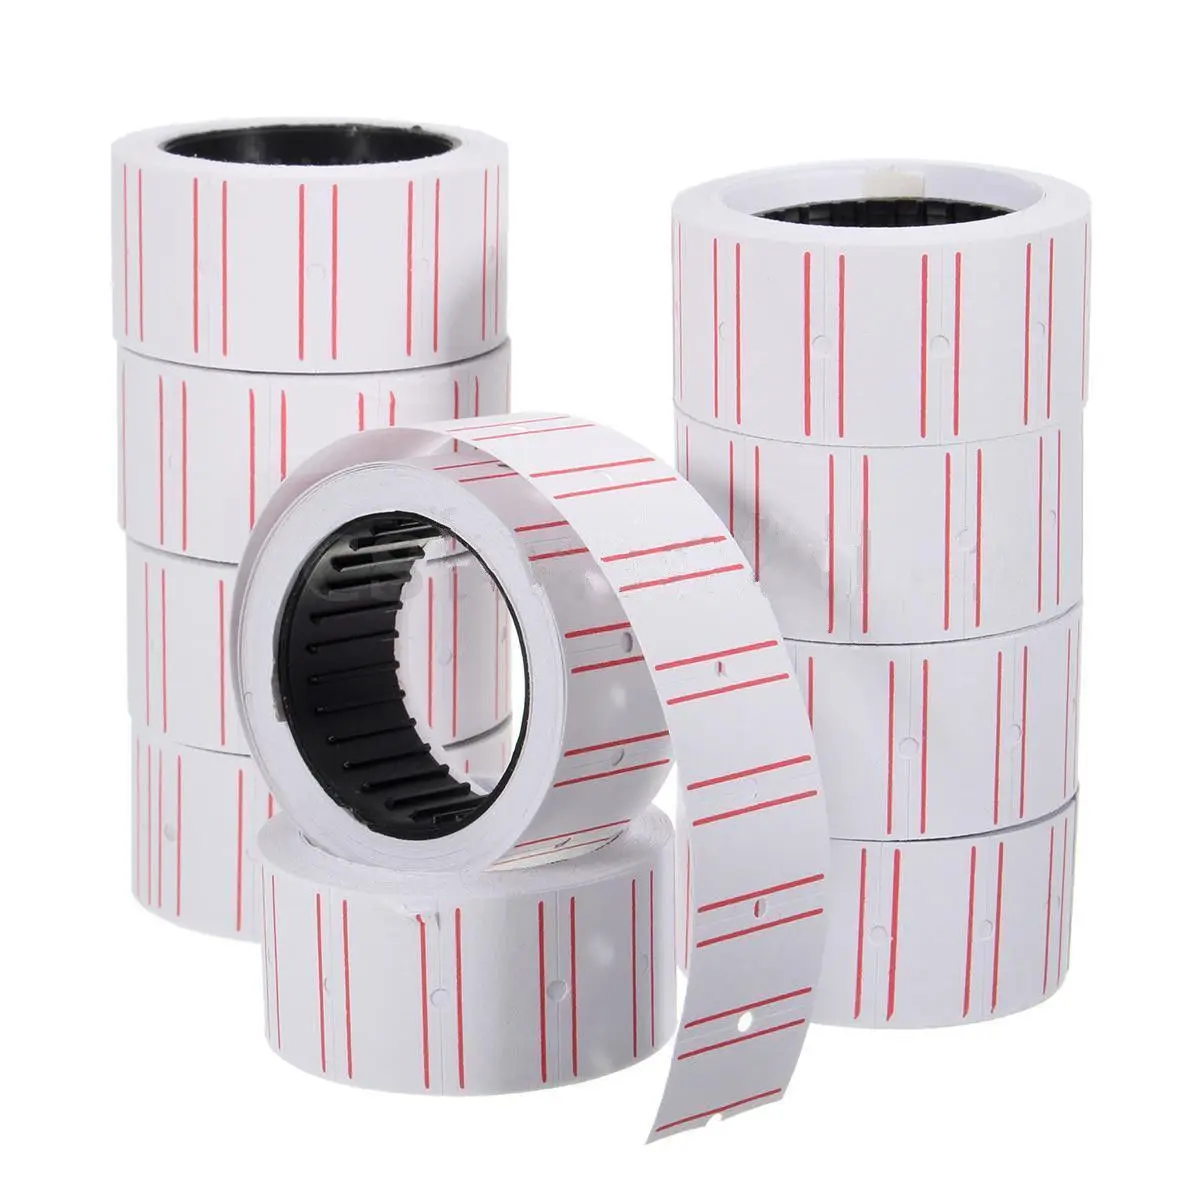 

10 Rolls (500 Labels/Roll) White Self Adhesive Price Label Tag Sticker Office Supplies 20x12mm Price Label Paper Tag Stickers